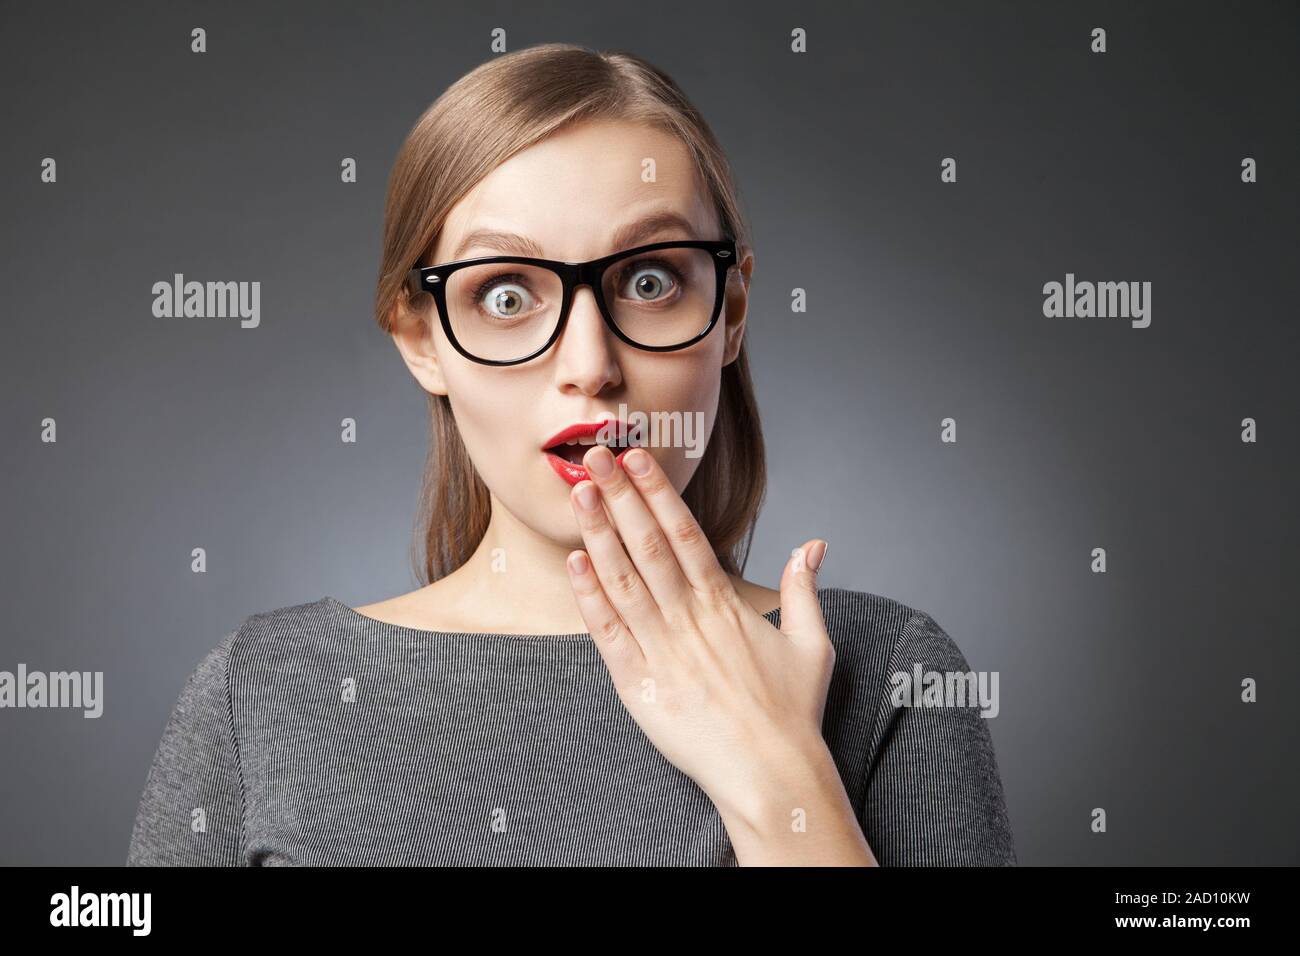 Wide-eyed astonished woman covering mouth with hand Stock Photo